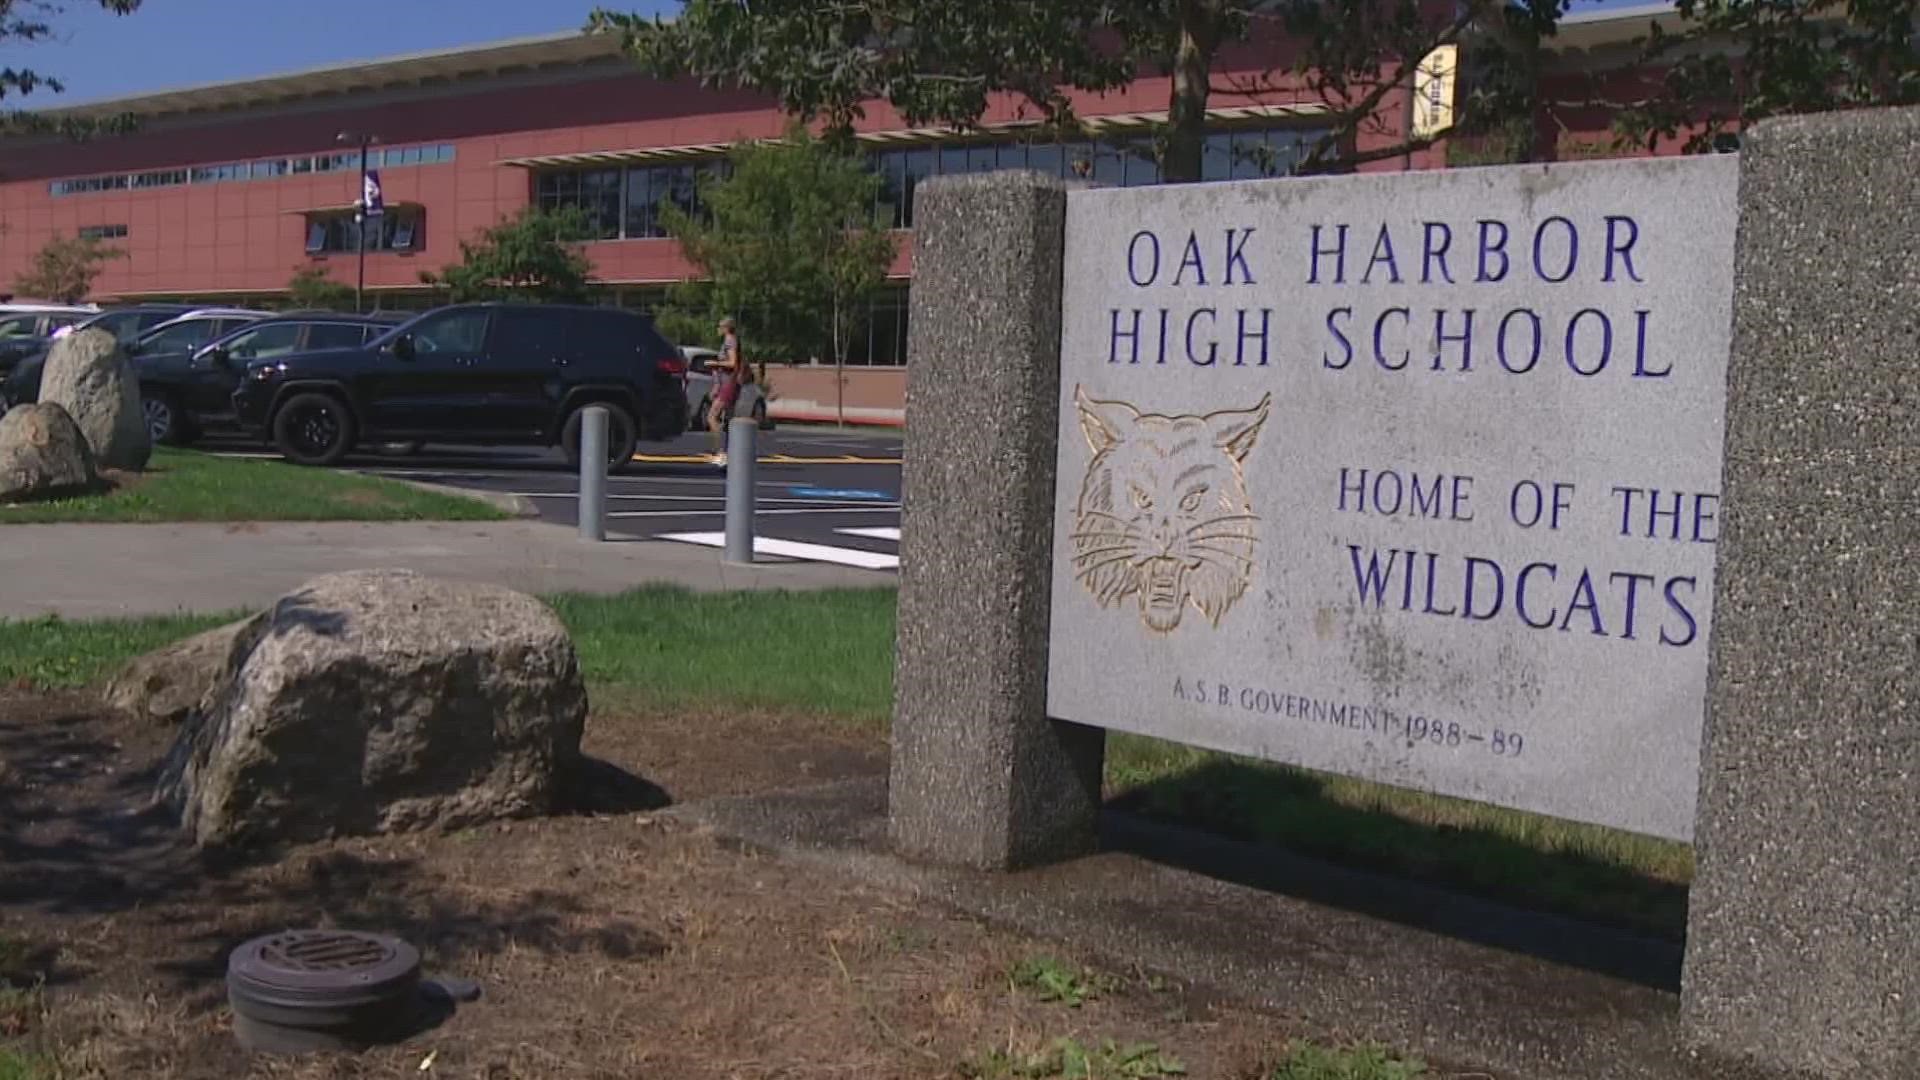 Parents worry students could be "outed" by school staff.